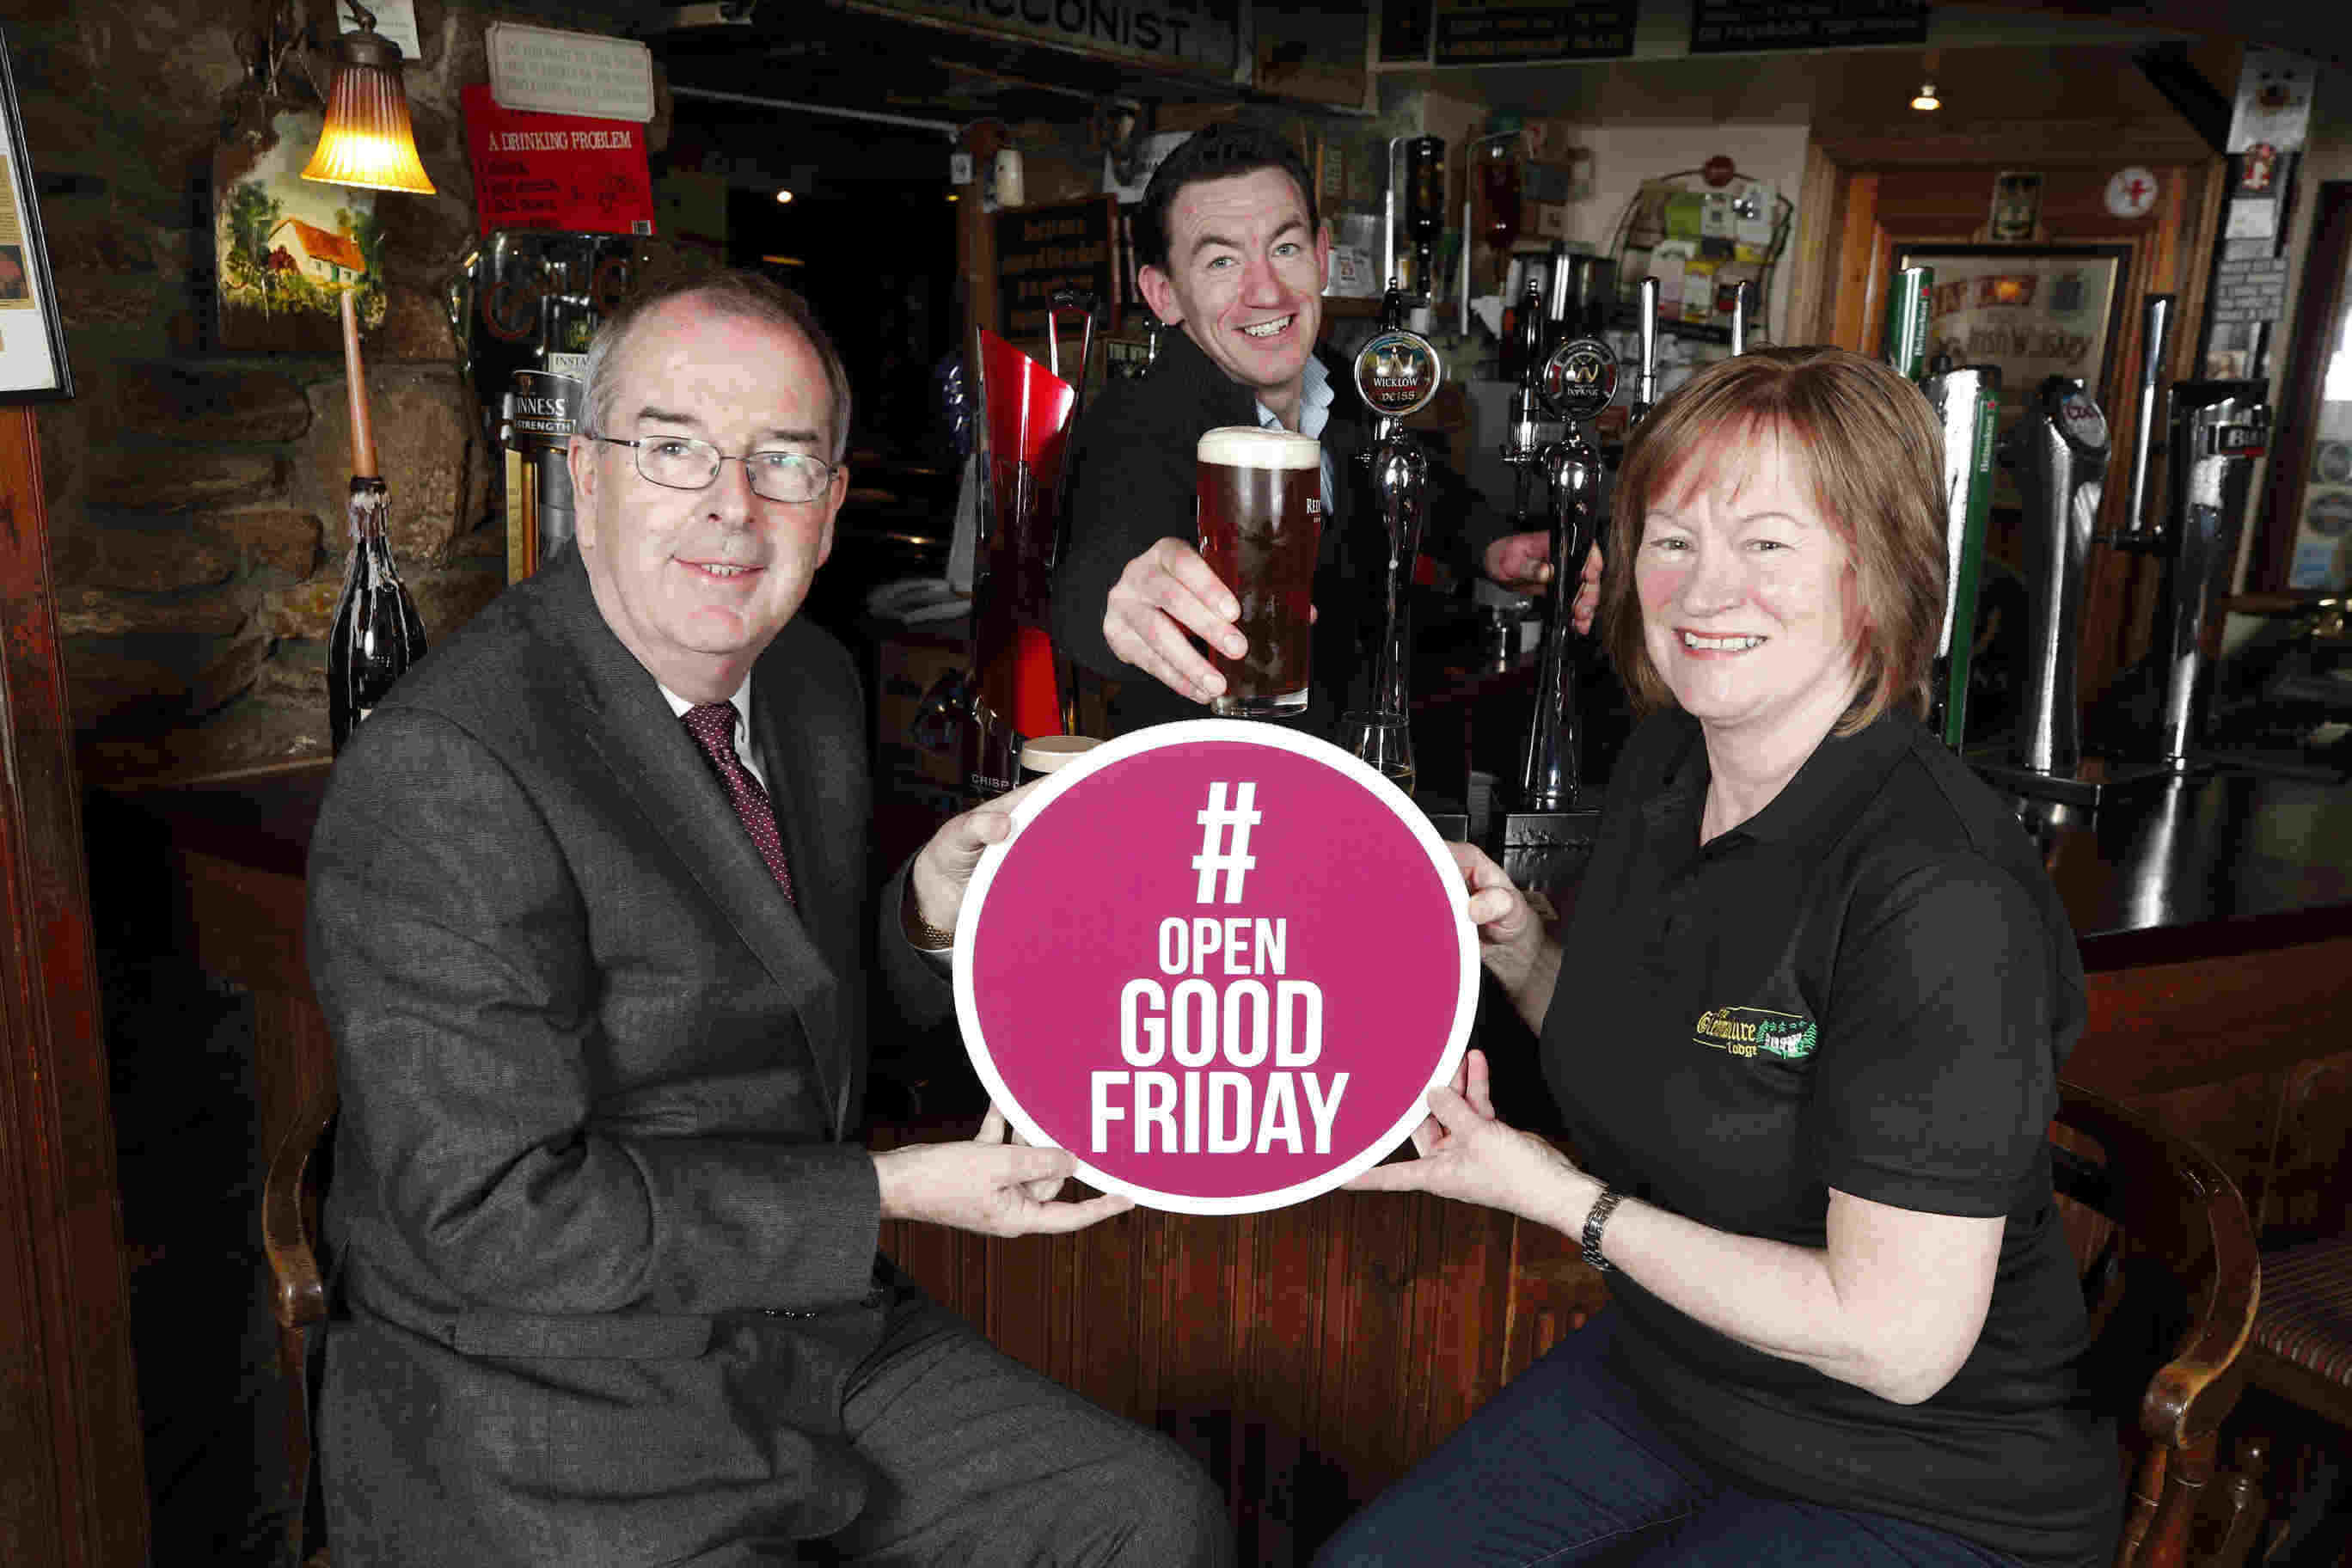 Good Good Friday at the Glenmalure Lodge in Wicklow. From left: VFI Chief Executive Padraig Cribben with Michael and Anne Dowling.